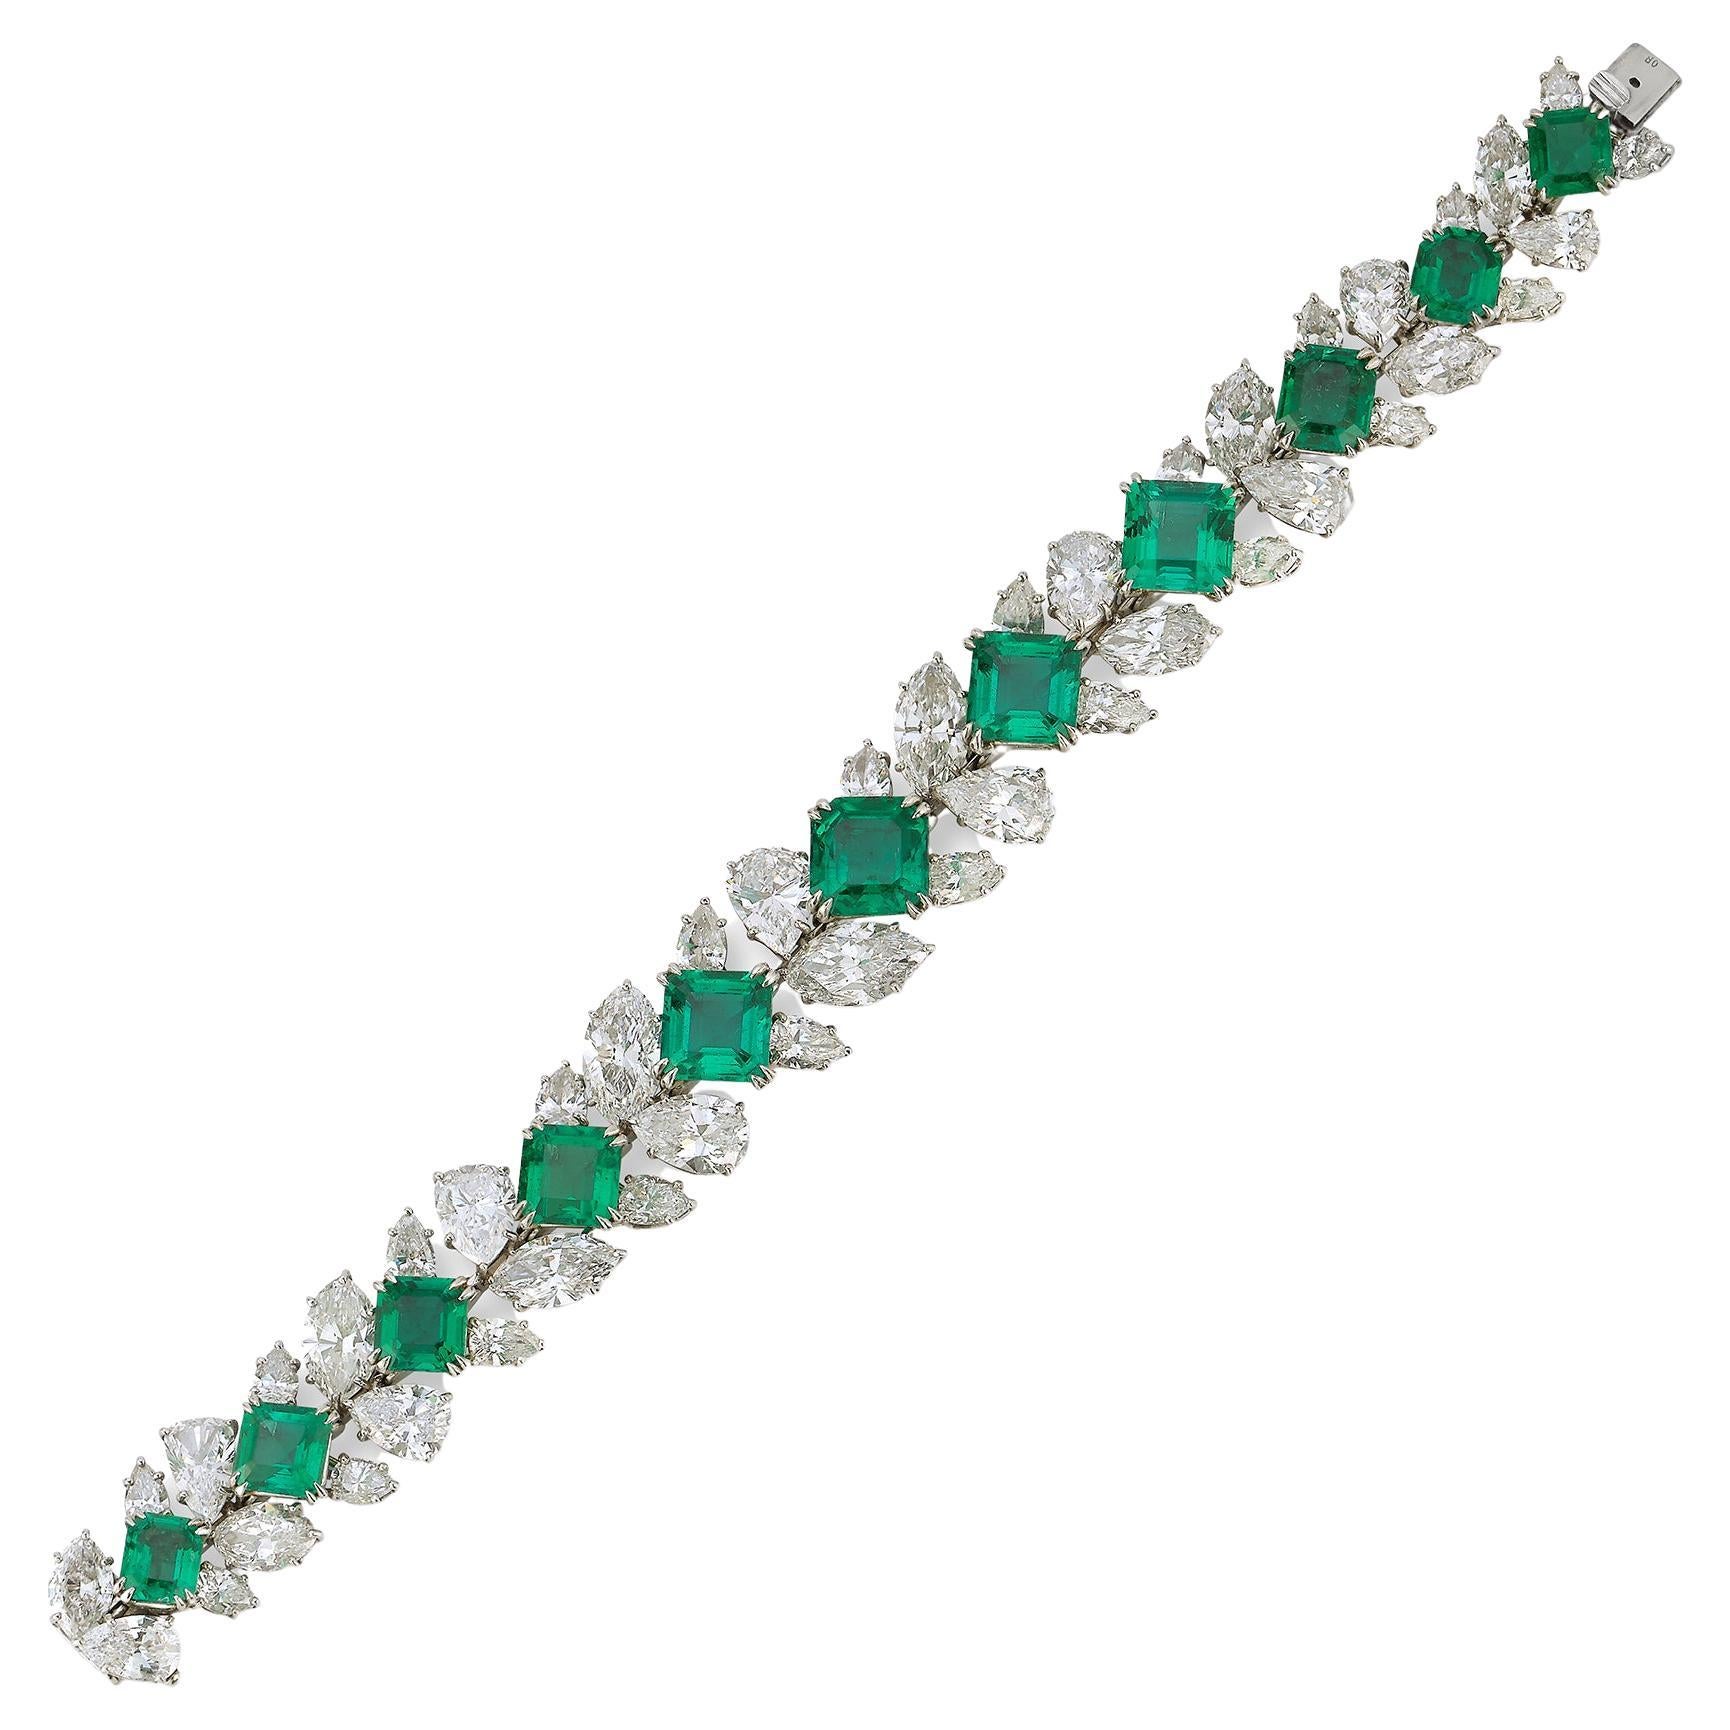 Highly Important Emerald and Diamond Bracelet by Harry Winston